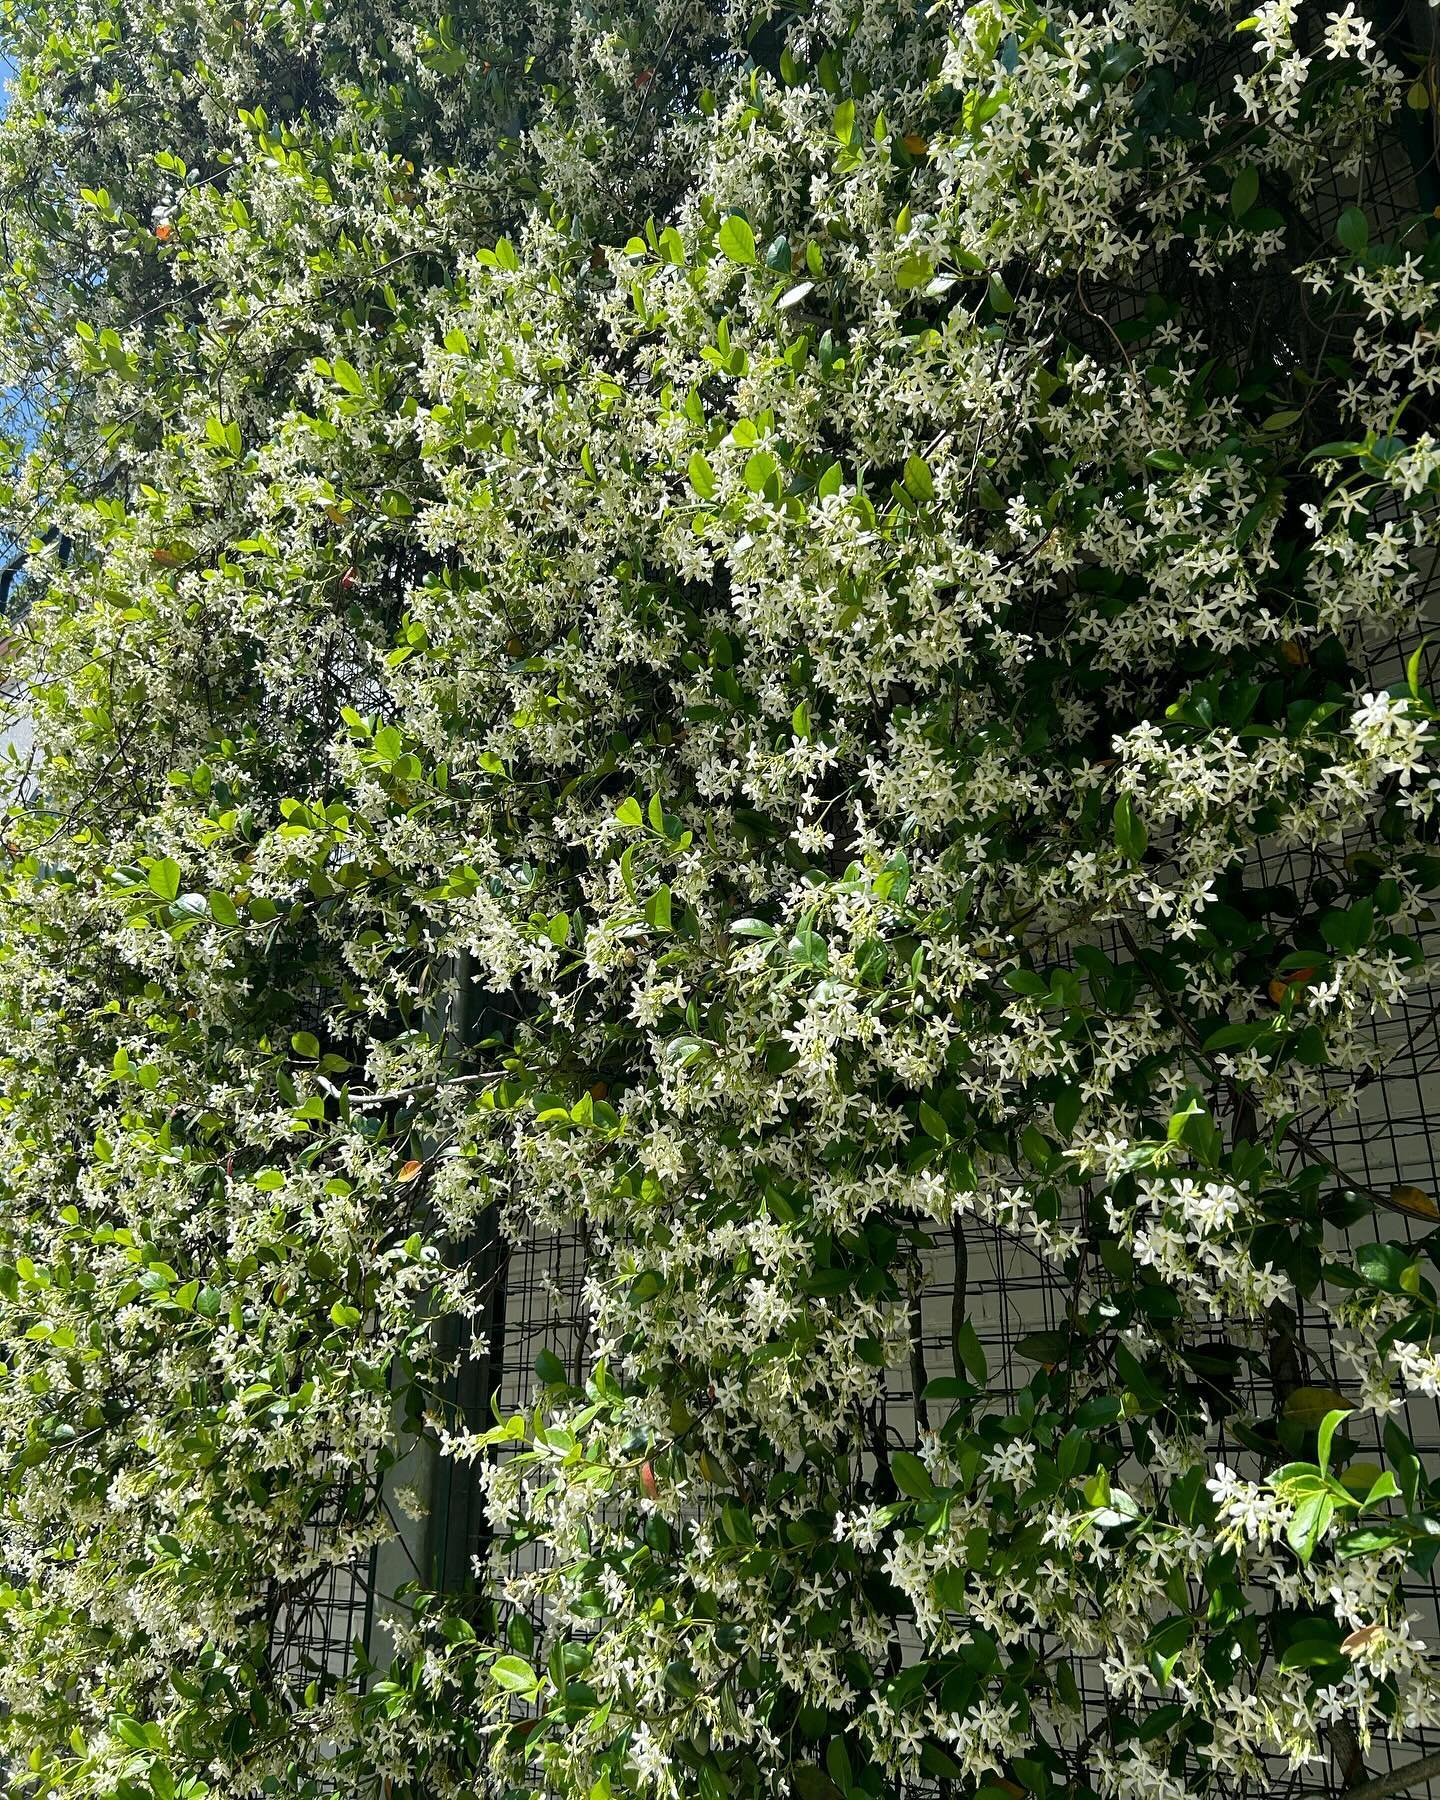 Passing by a wall of beautiful star jasmine (and amazing fragrance) on the way to school! The best part of a walking commute 🎶💕🌸#walking #walkingcommute #jasmineflower #gainesville